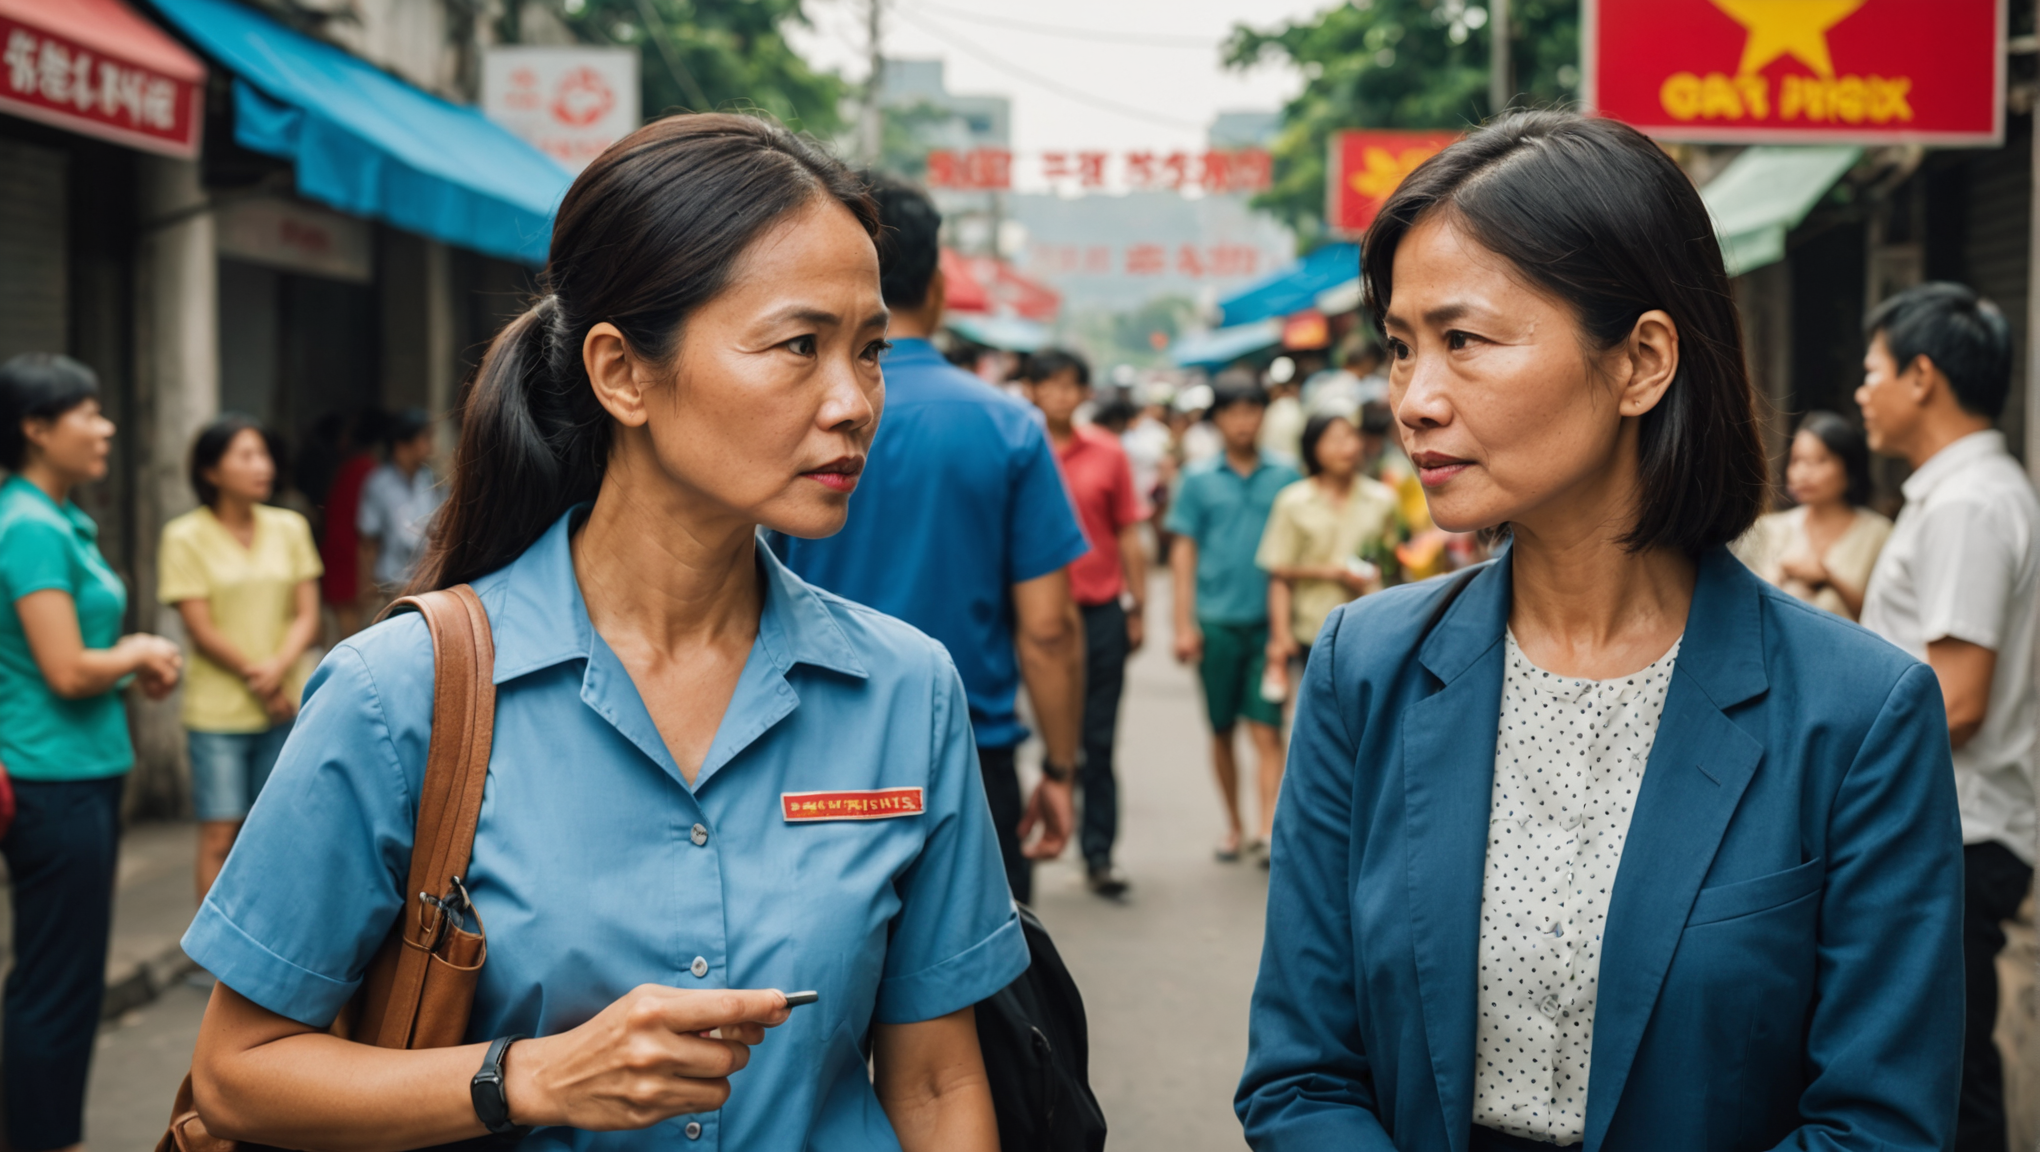 learn how to stay safe from impersonation scams in vietnam and beyond. protect yourself and avoid becoming a target. get essential tips to safeguard against fraud and stay secure.